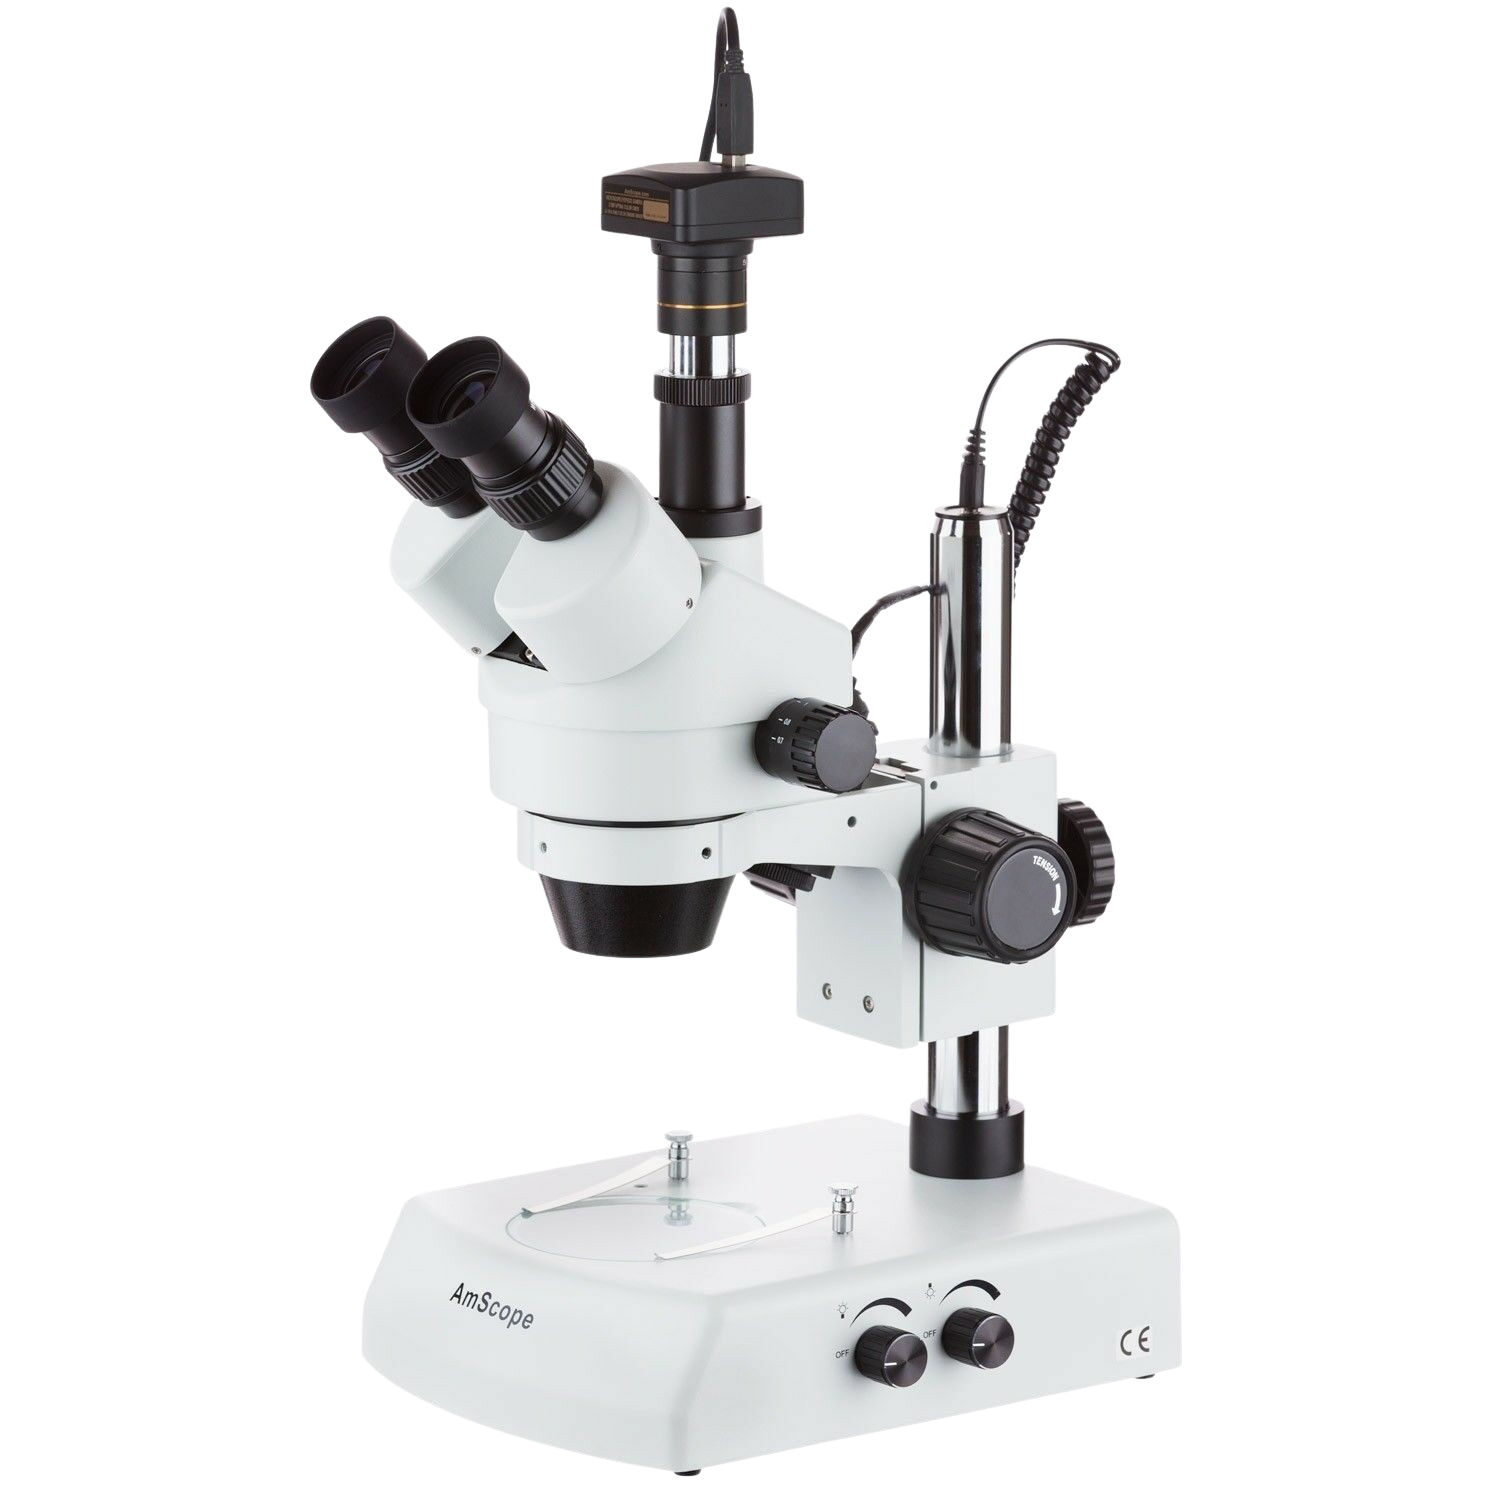 AmScope, Amscope SM-2TX-10M 3.5X - 45X Trinocular Stereo Zoom Microscope with Dual Halogen Lights with 10MP Camera New